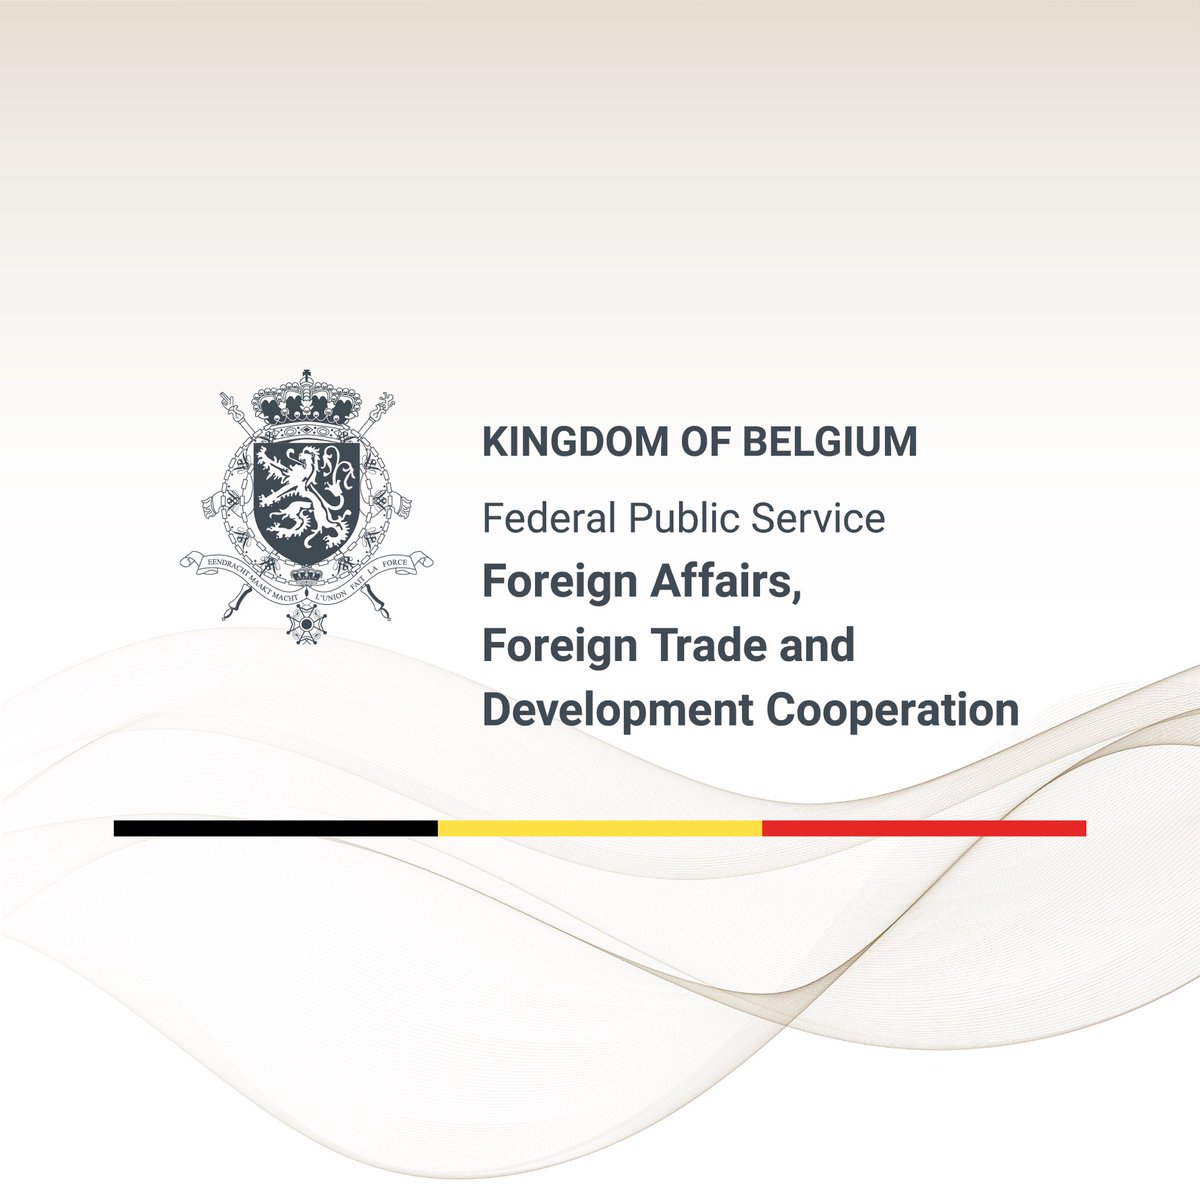 Belgium strongly condemns the attack on 🇸🇰 Prime Minister Robert #Fico. Our thoughts are with his family and the people of #Slovakia. We wish him a speedy recovery. Violence has no place in our societies. Acts of this kind must be condemned and prosecuted.